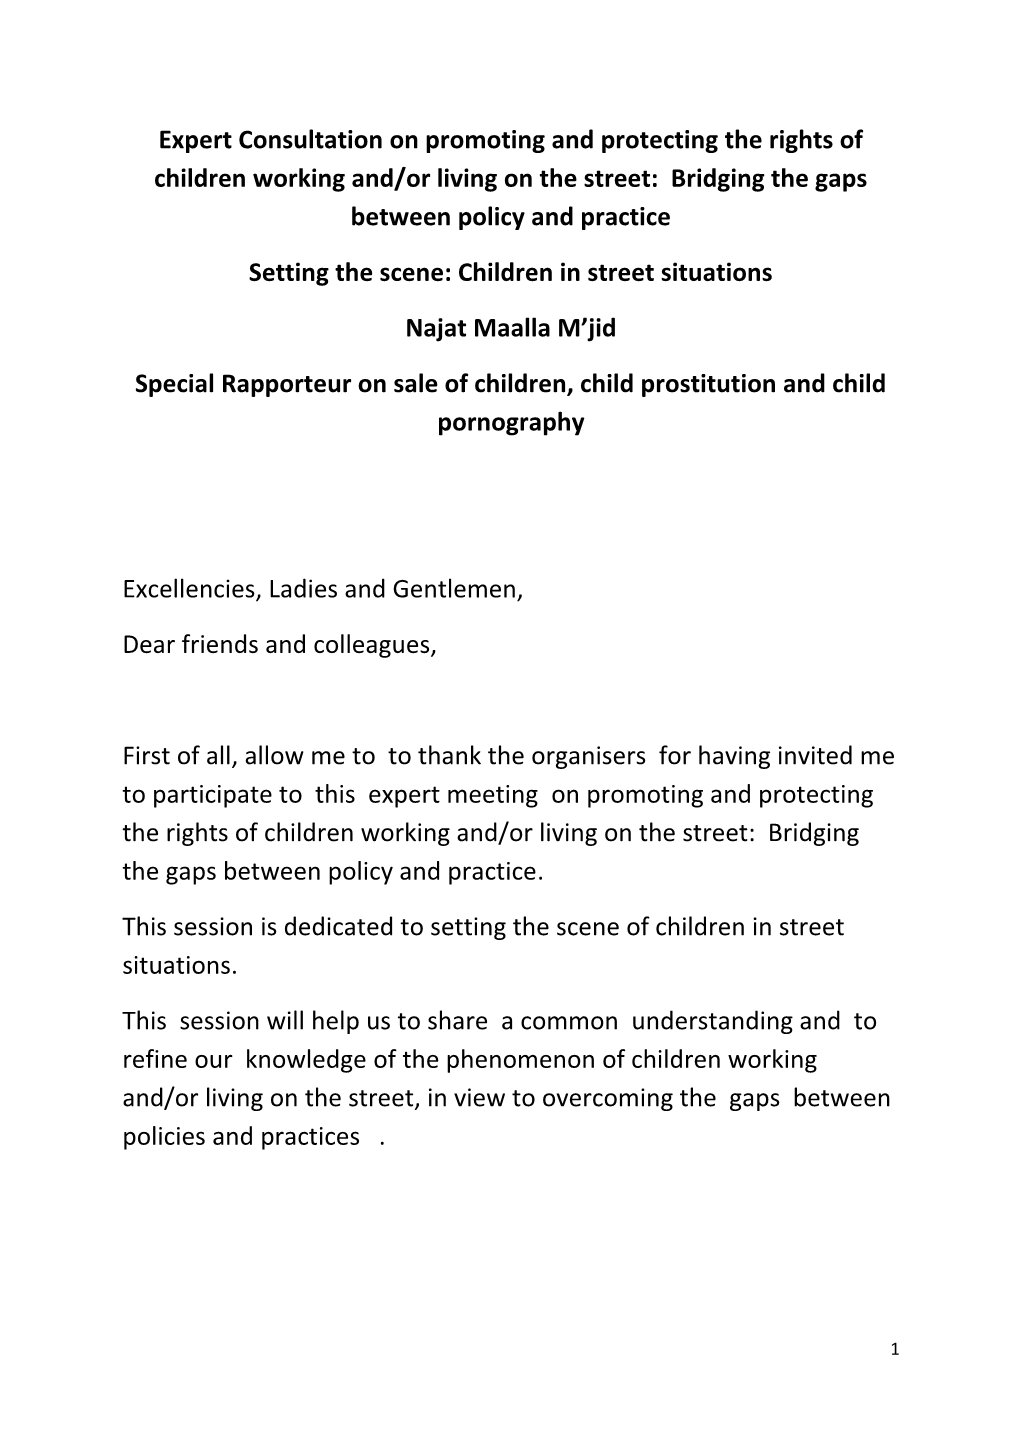 Setting the Scene: Children in Street Situations